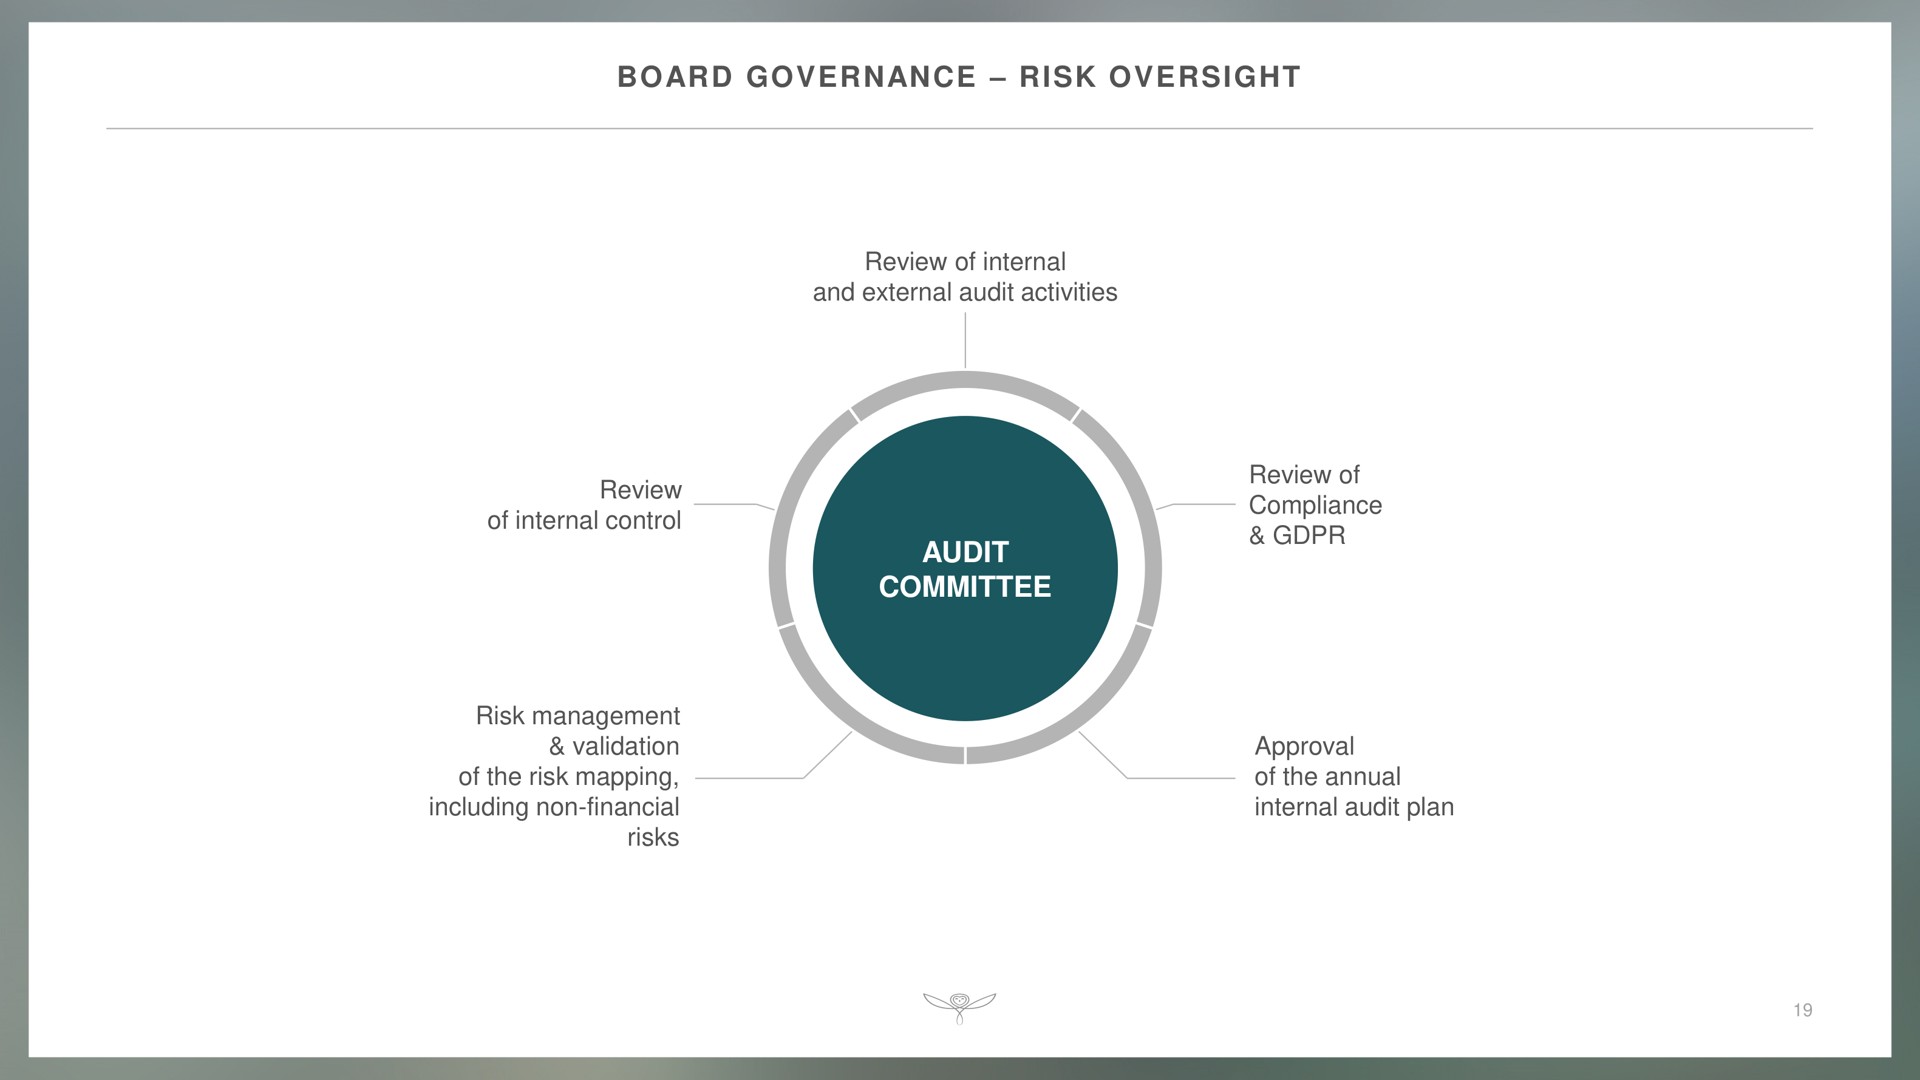 board governance risk oversight review of internal and external audit activities audit committee review of compliance approval of the annual internal audit plan review of internal control risk management validation of the risk mapping including non financial risks | Kering